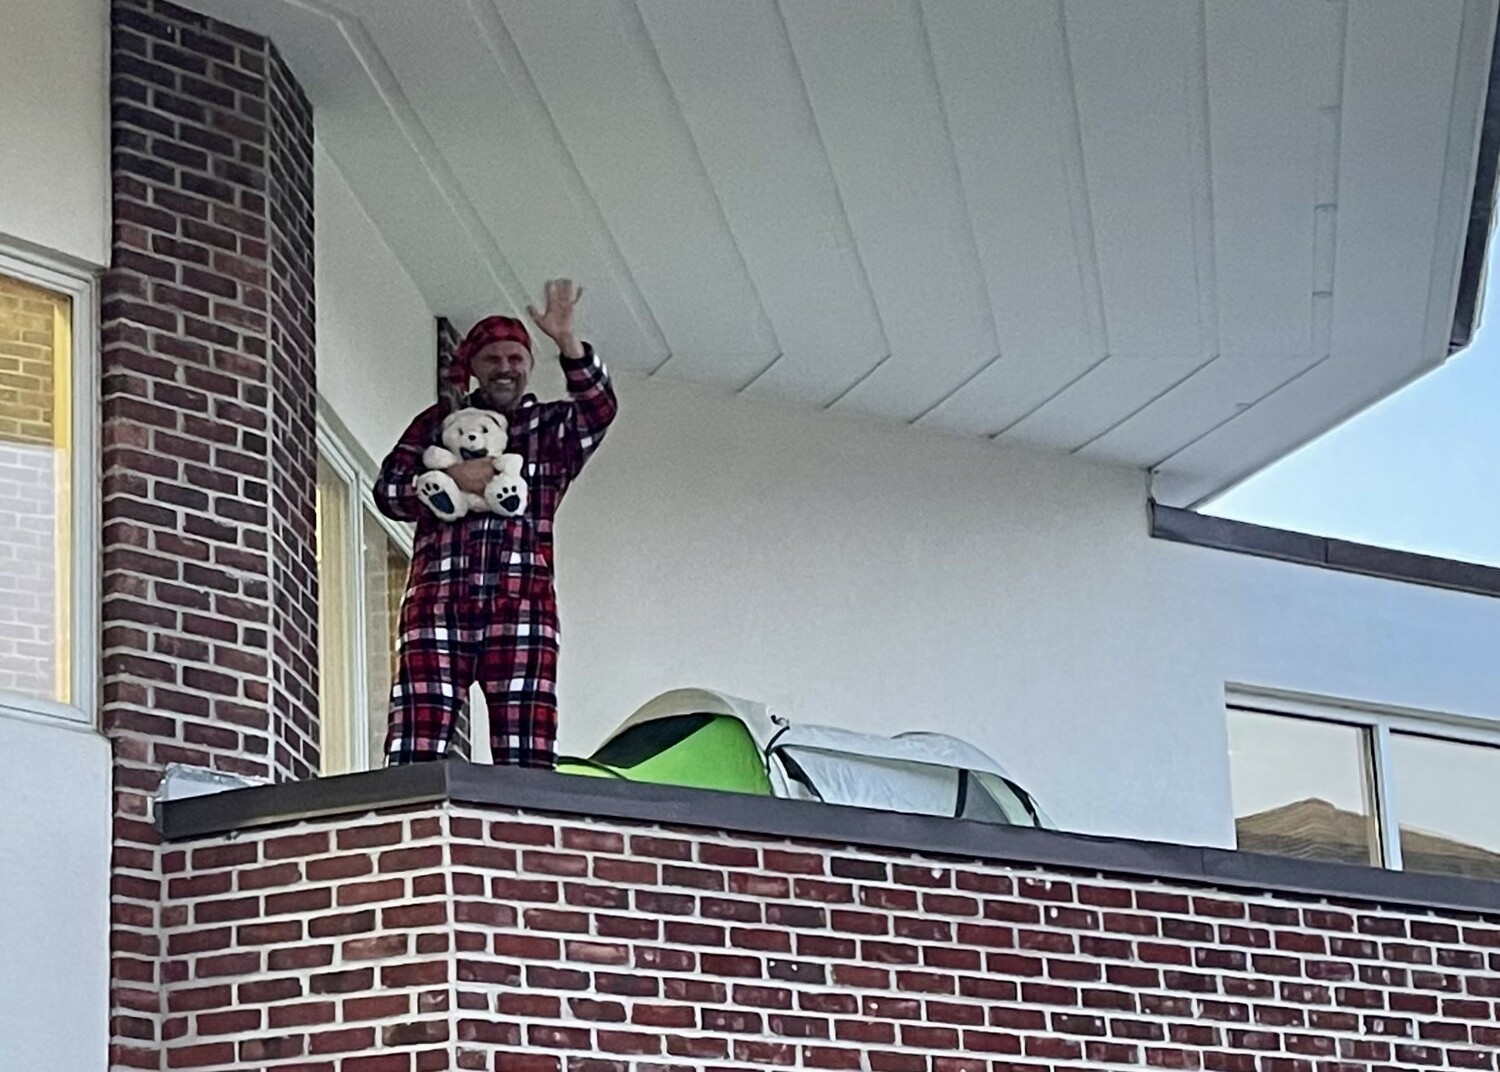 Tuckahoe Common School District Superintendent Leonard Skuggevik spent a night on the roof of the Middle School to celebrate his students reaching their reading goals for the year. Wearing a traditional nightcap, Skuggevik read the students a bedtime story using Google Classroom.  The following morning, the entire school and staff gathered on the front lawn to greet Skuggevik with a cheerful 